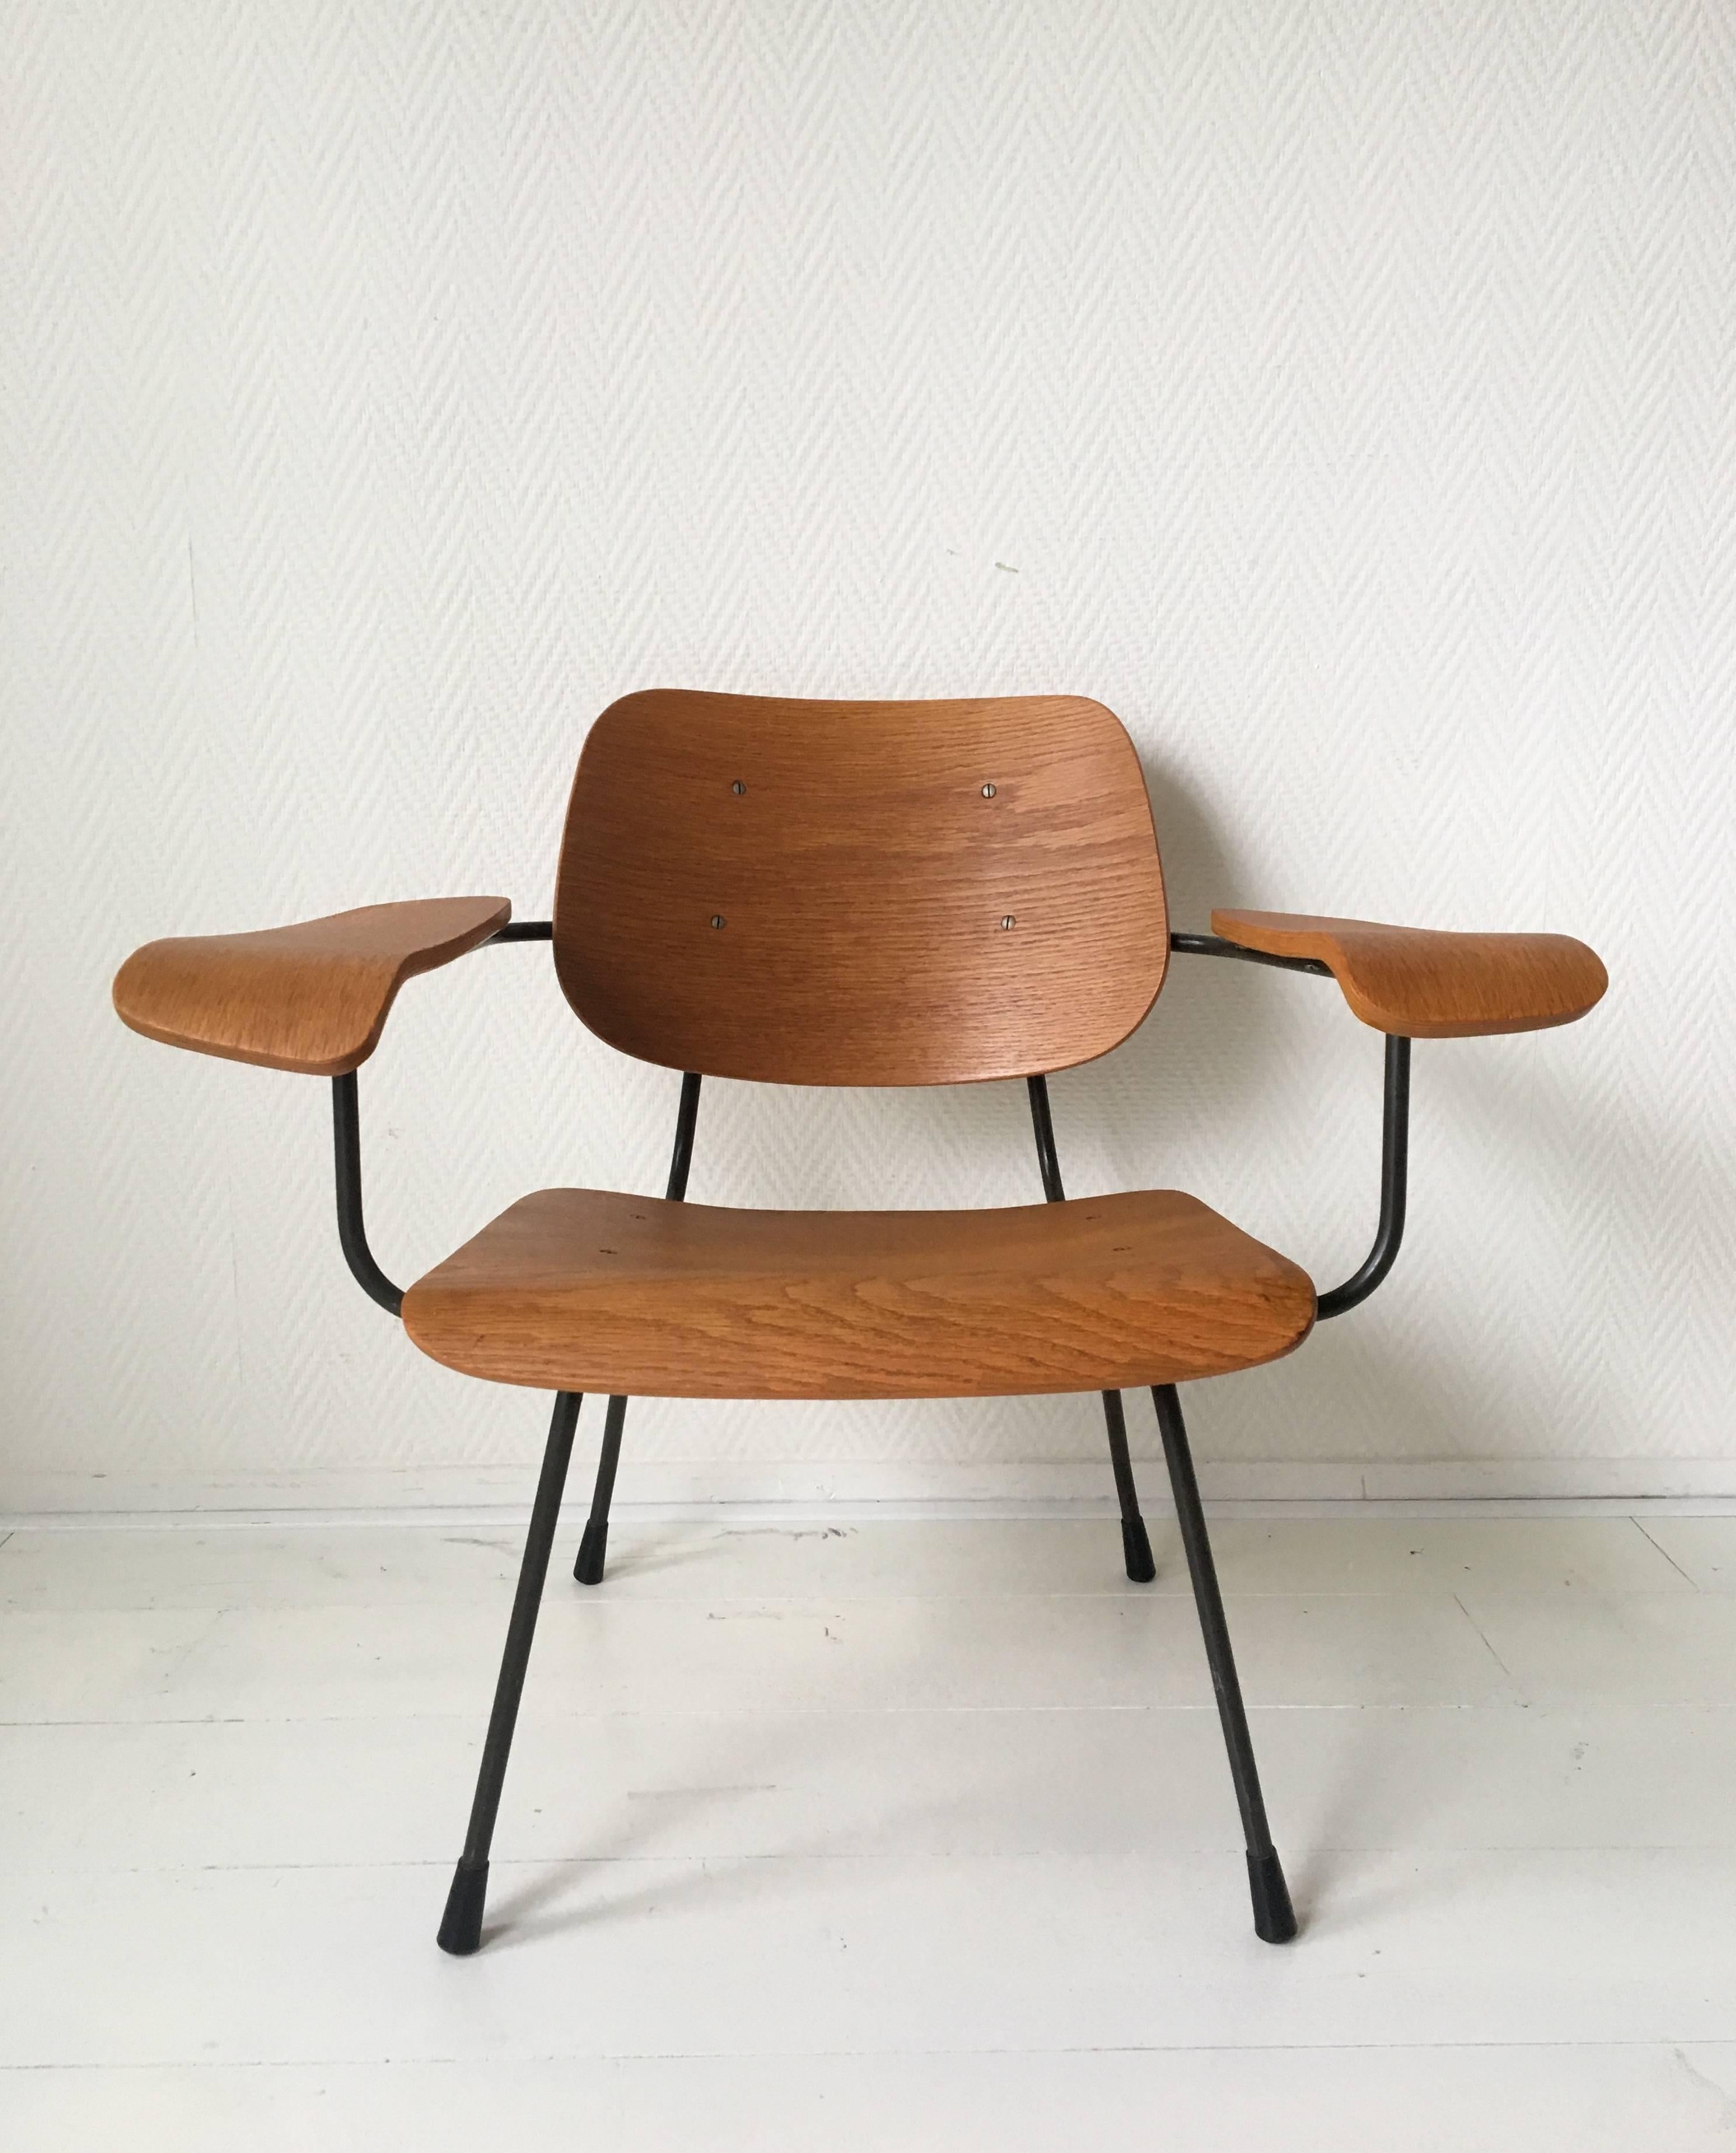 Industrial midcentury design by Tjerk Reijenga for Pilastro in 1962.
The chair features a dark anthracite colored metal frame with armrests, back and seat made from teak plywood. Very good and solid condition, with some small restorations (see: